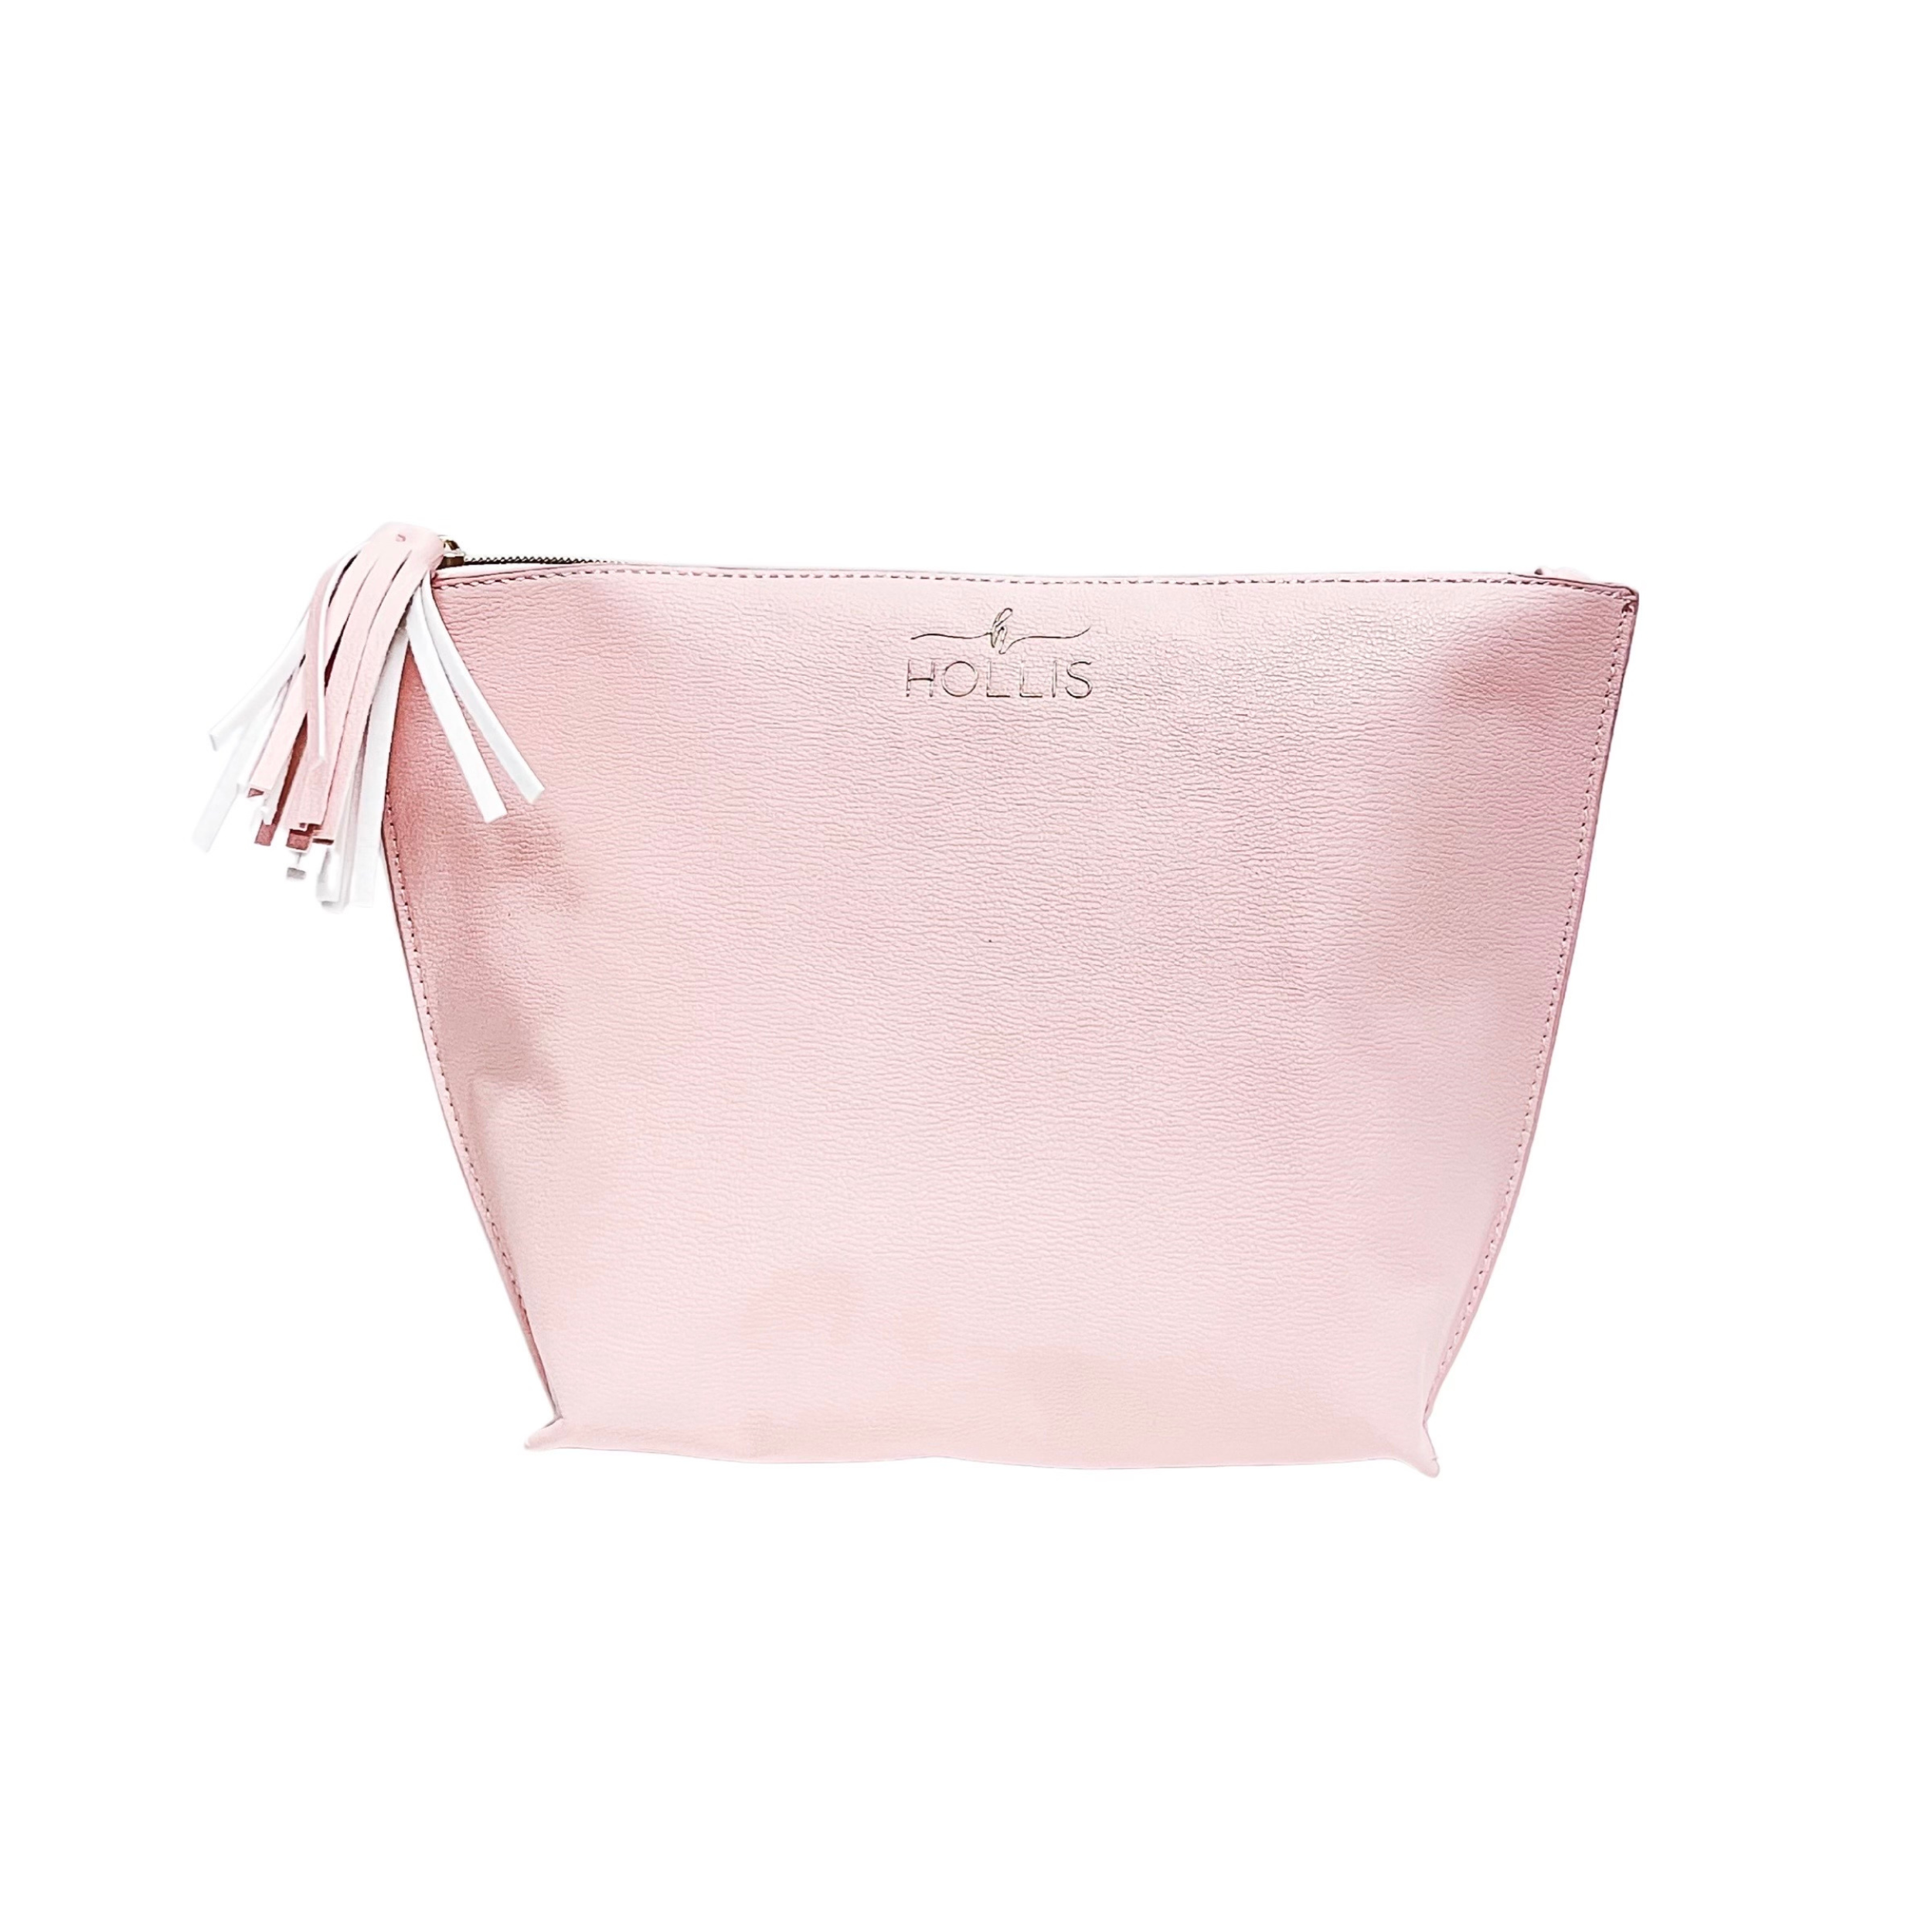 Hollis | Holy Chic Bag in Blush - Giddy Up Glamour Boutique